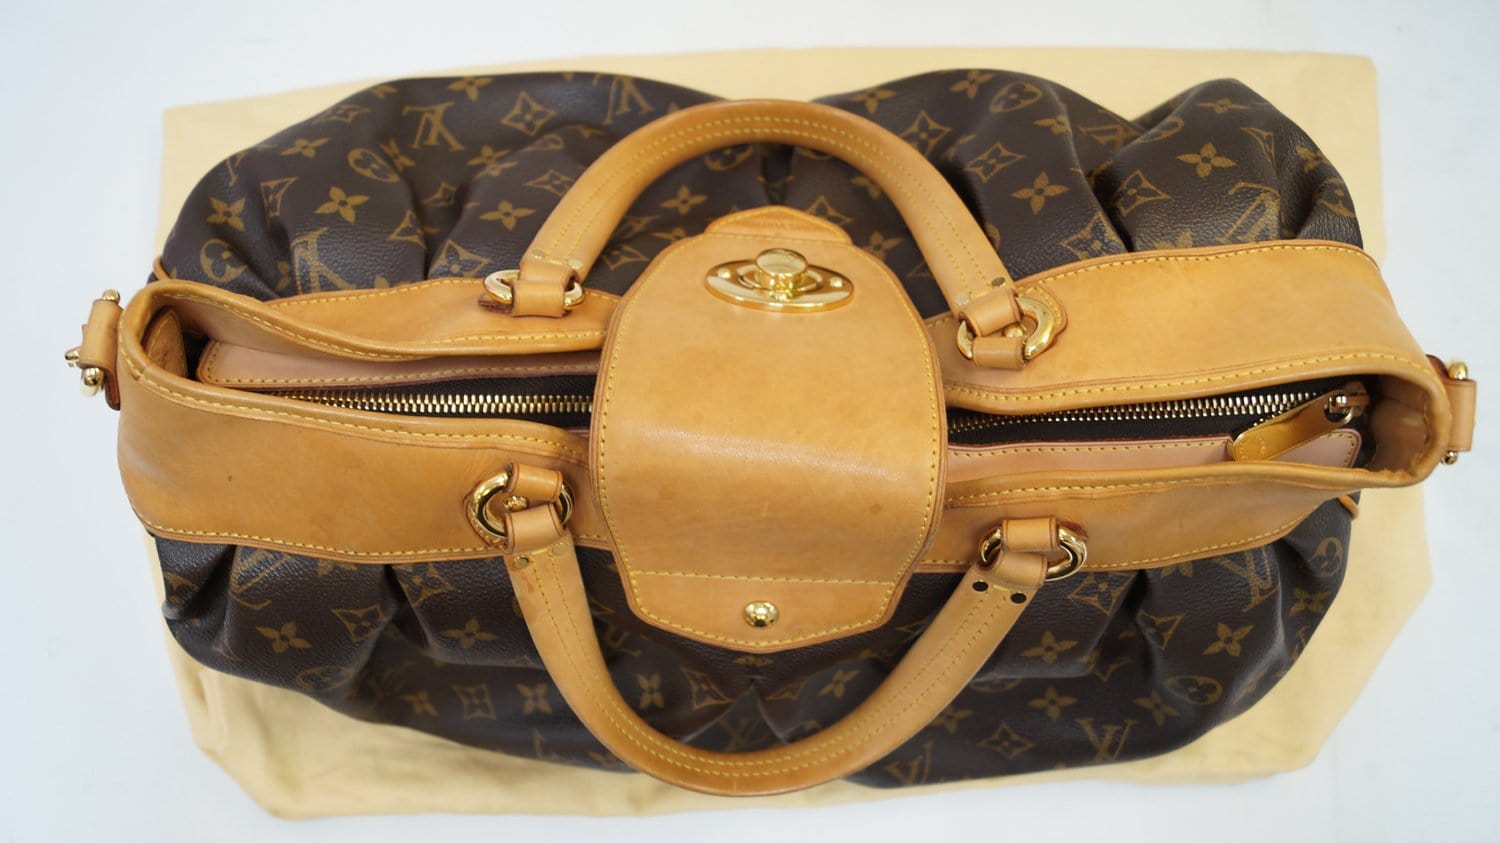 100% Authentic Preowned Louis Vuitton Boetie GM with Receipt!